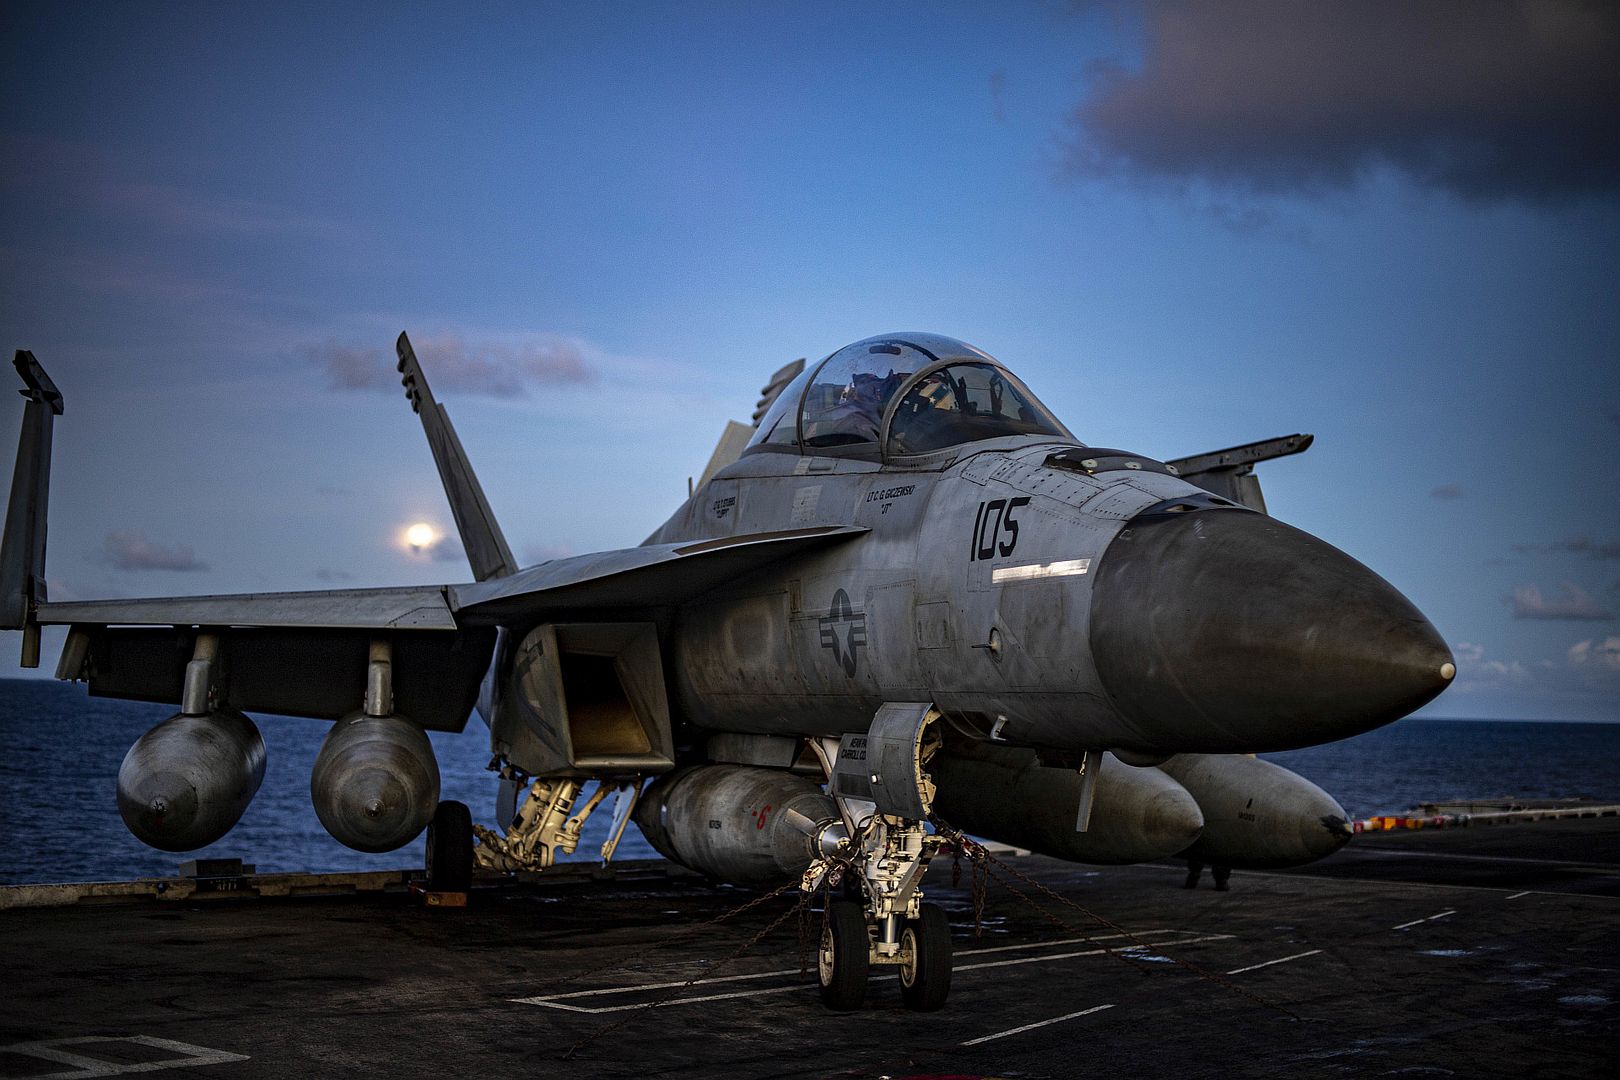  22 Prepares For Flight Operations On The Flight Deck Of The Aircraft Carrier USS Nimitz